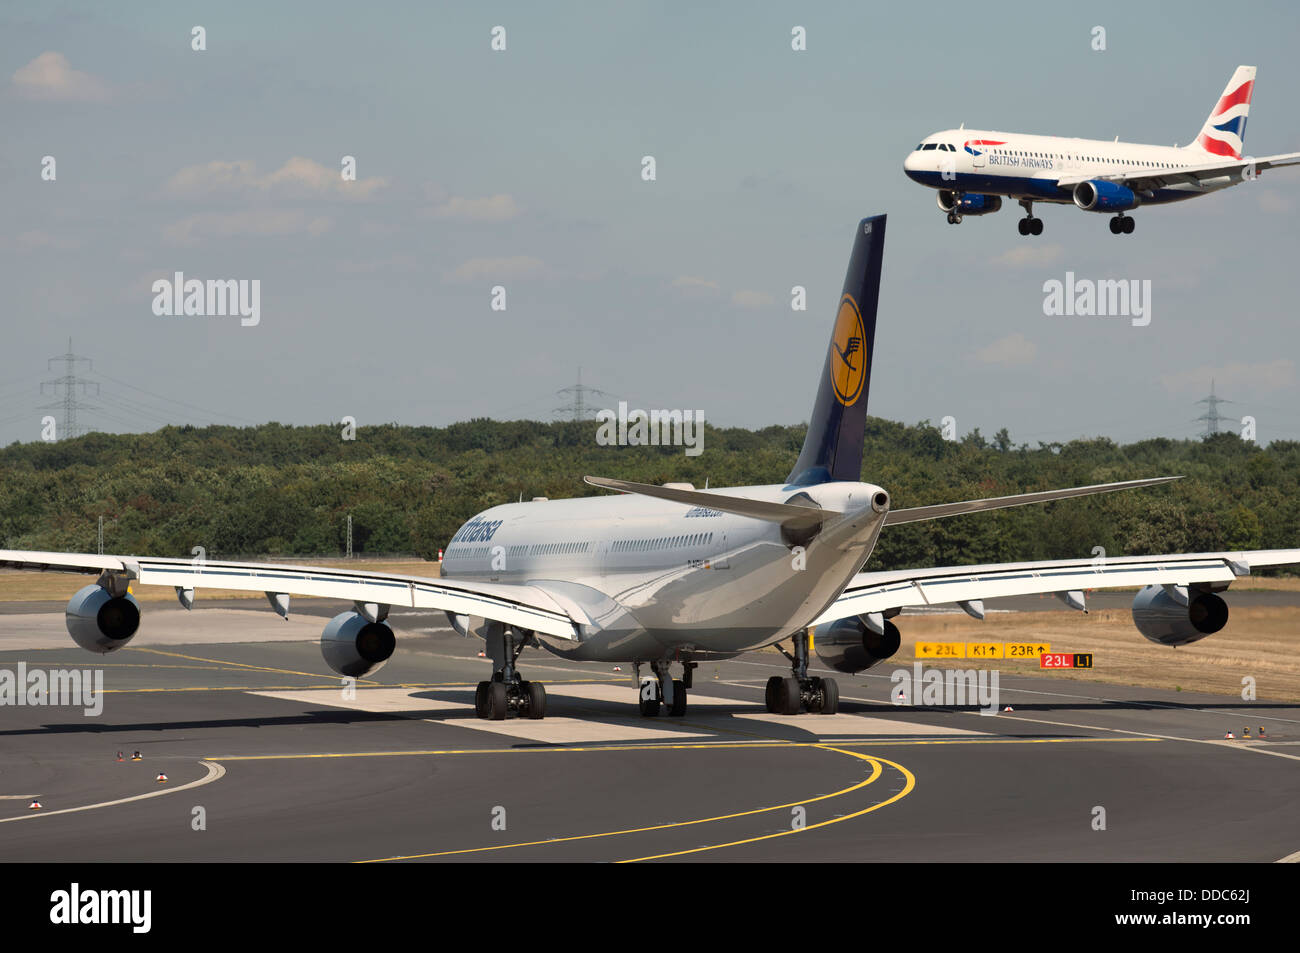 Lufthansa Airbus A340-300 waiting to take-off at Dusseldorf International airport, Germany. Stock Photo